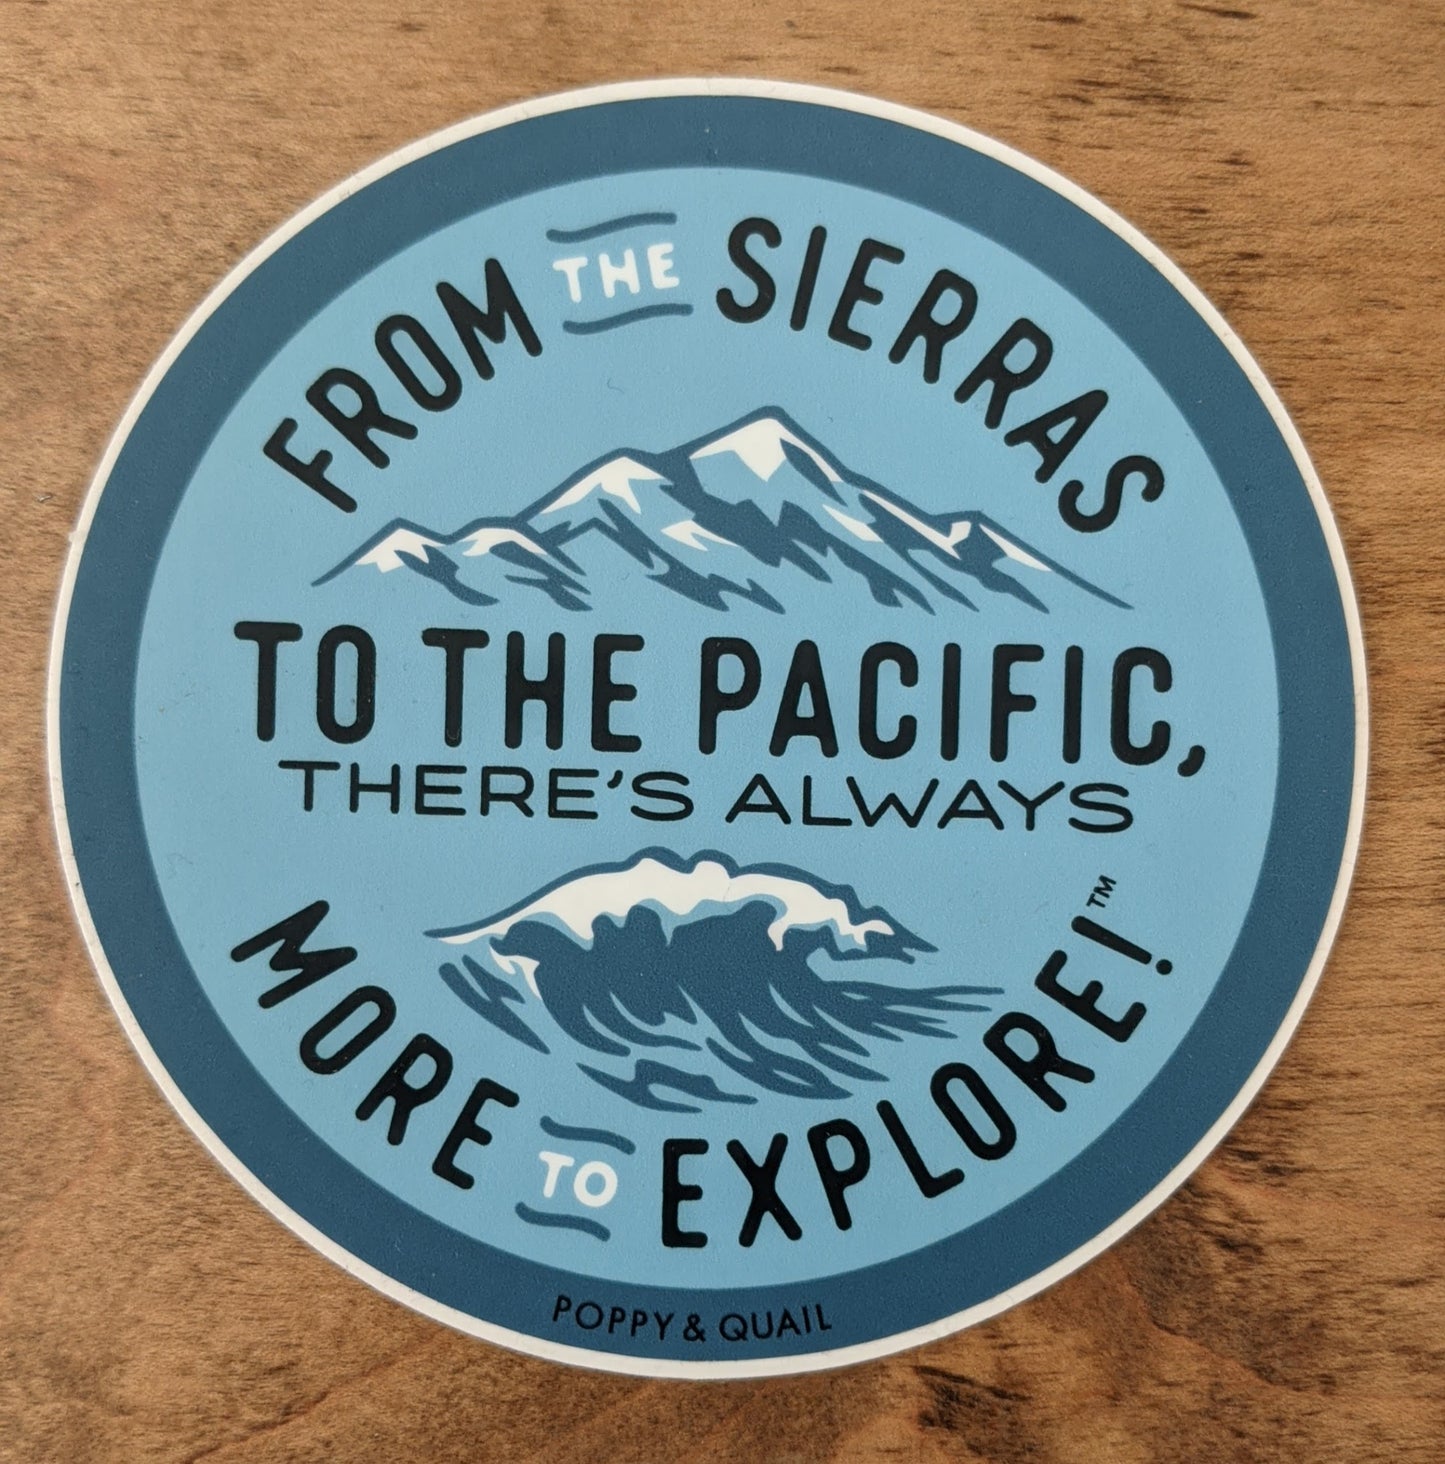 Large round blue sticker reading "From the Sierras to the Pacific, there's always more to explore" by Poppy & Quail